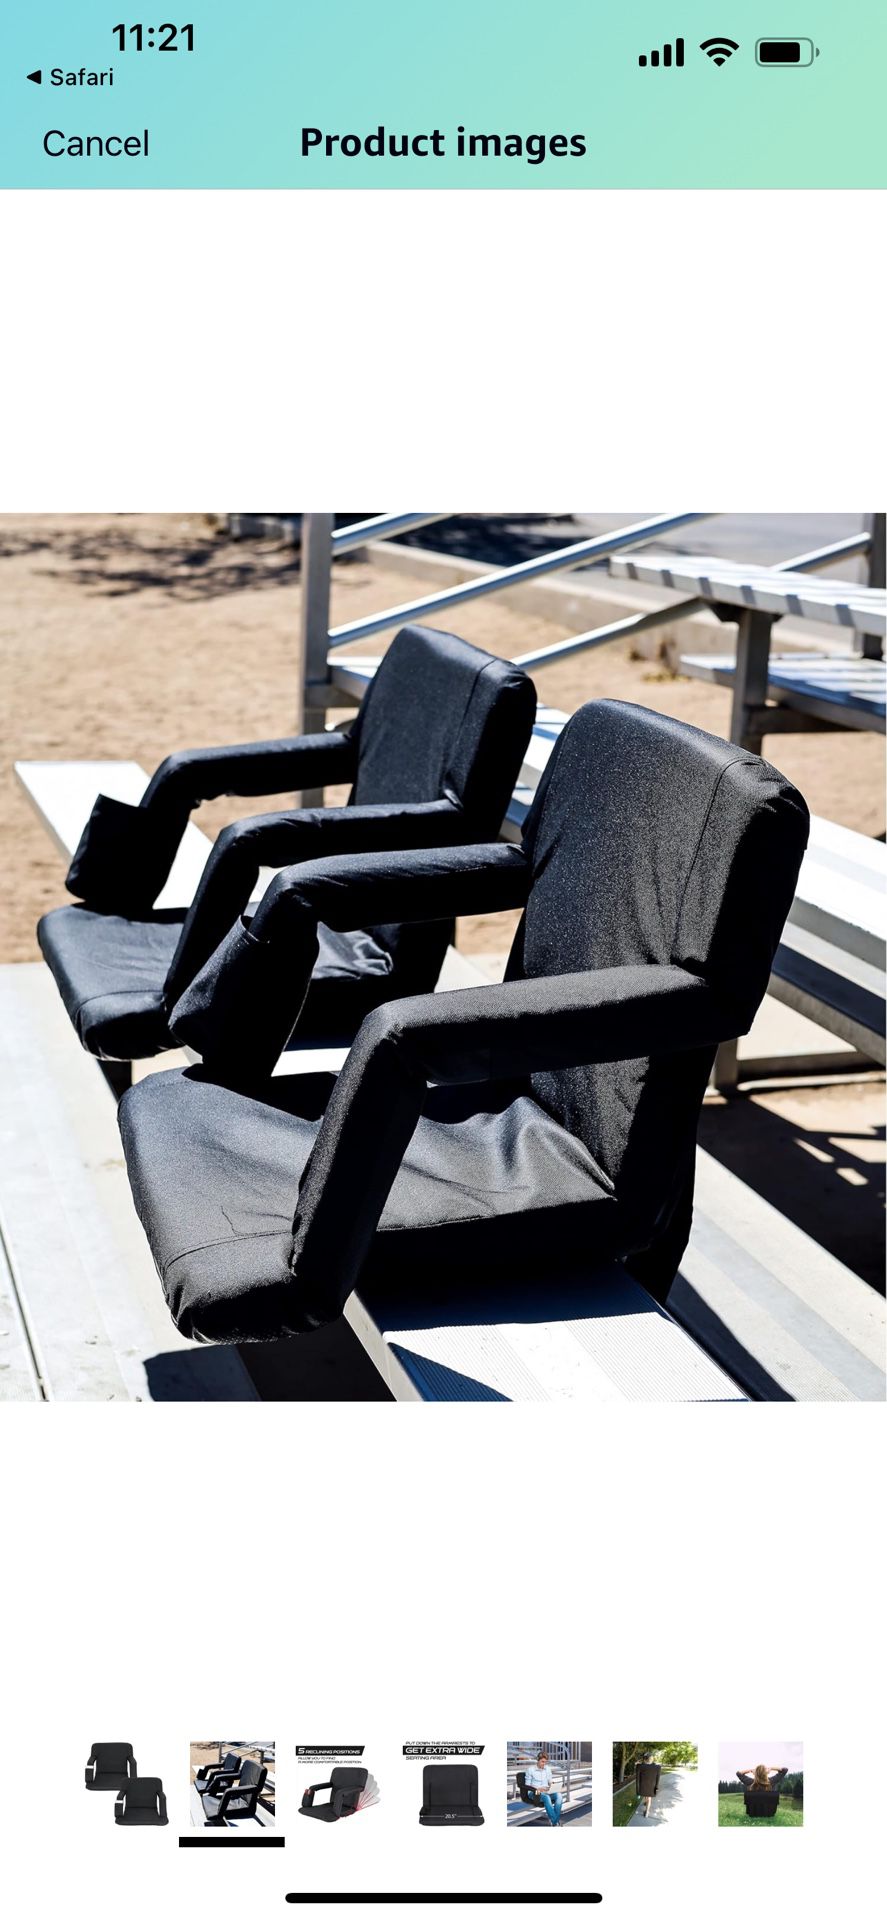 Folding Stadium Seat with Back Support 2 Pack, Bleacher Chairs with Back and Cushion, Wide Reclining Bleacher Seat